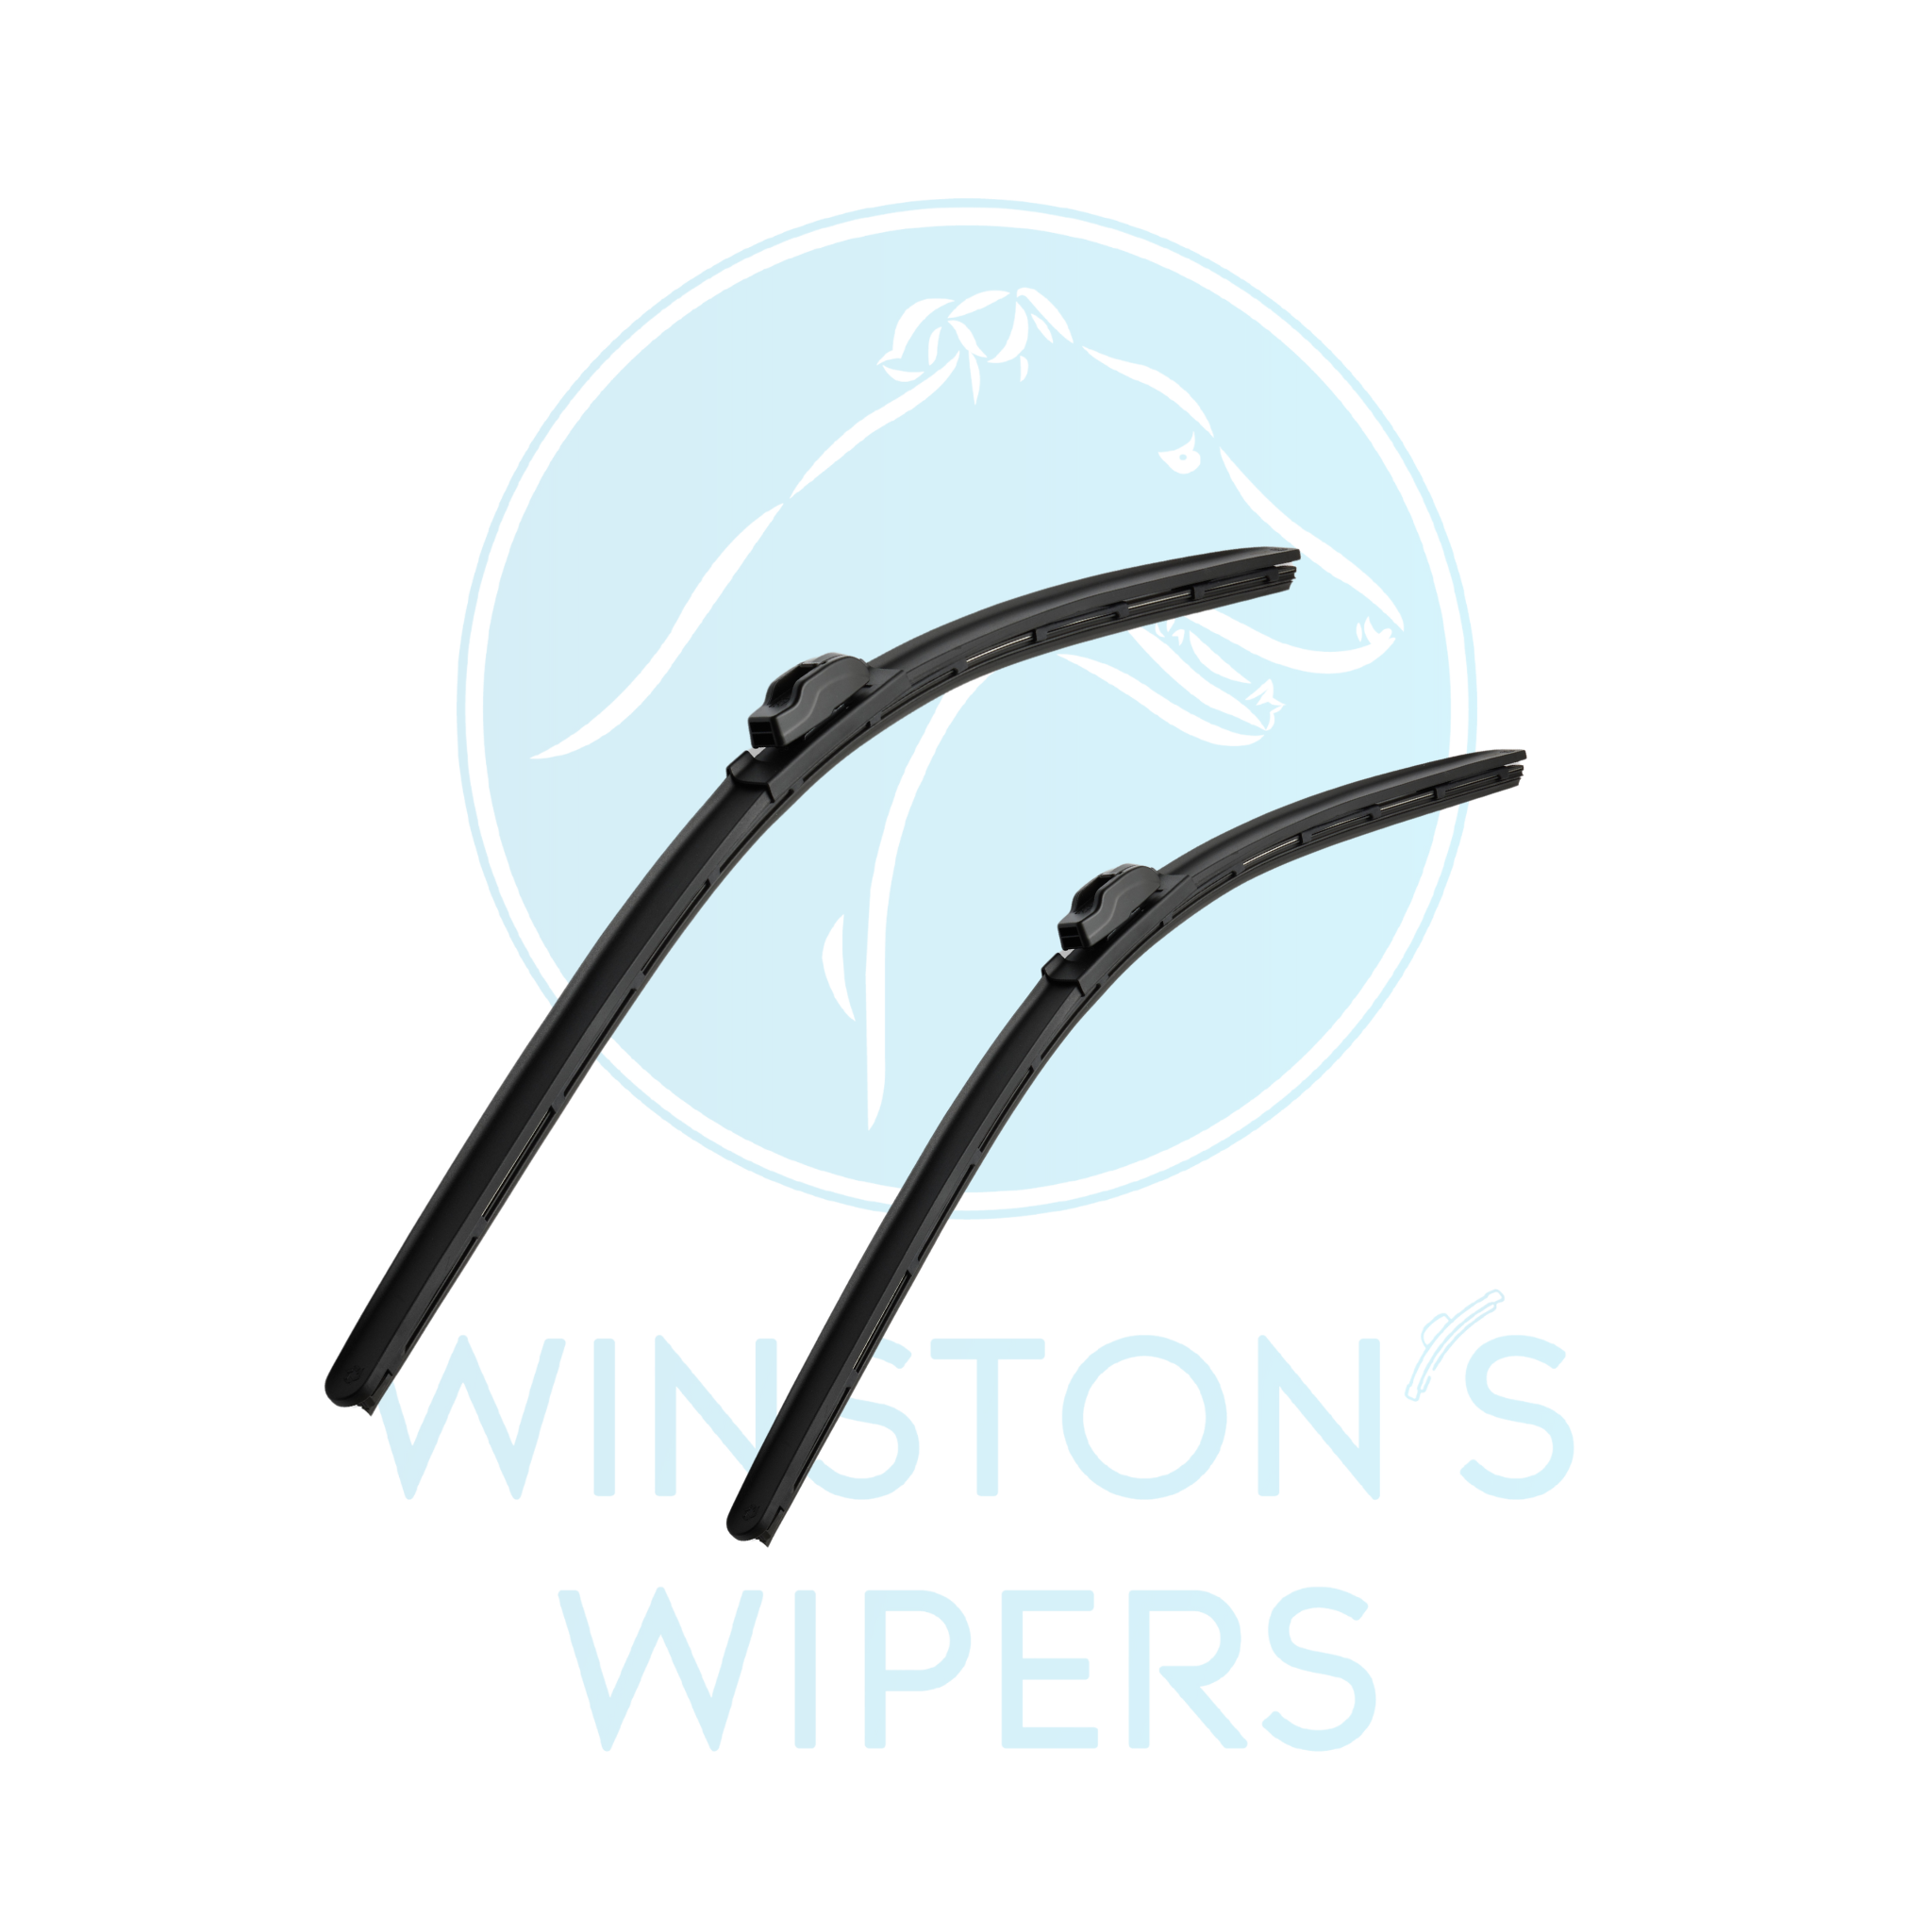 Winston's Aeroblade Wipers To Suit Nissan Patrol Y62